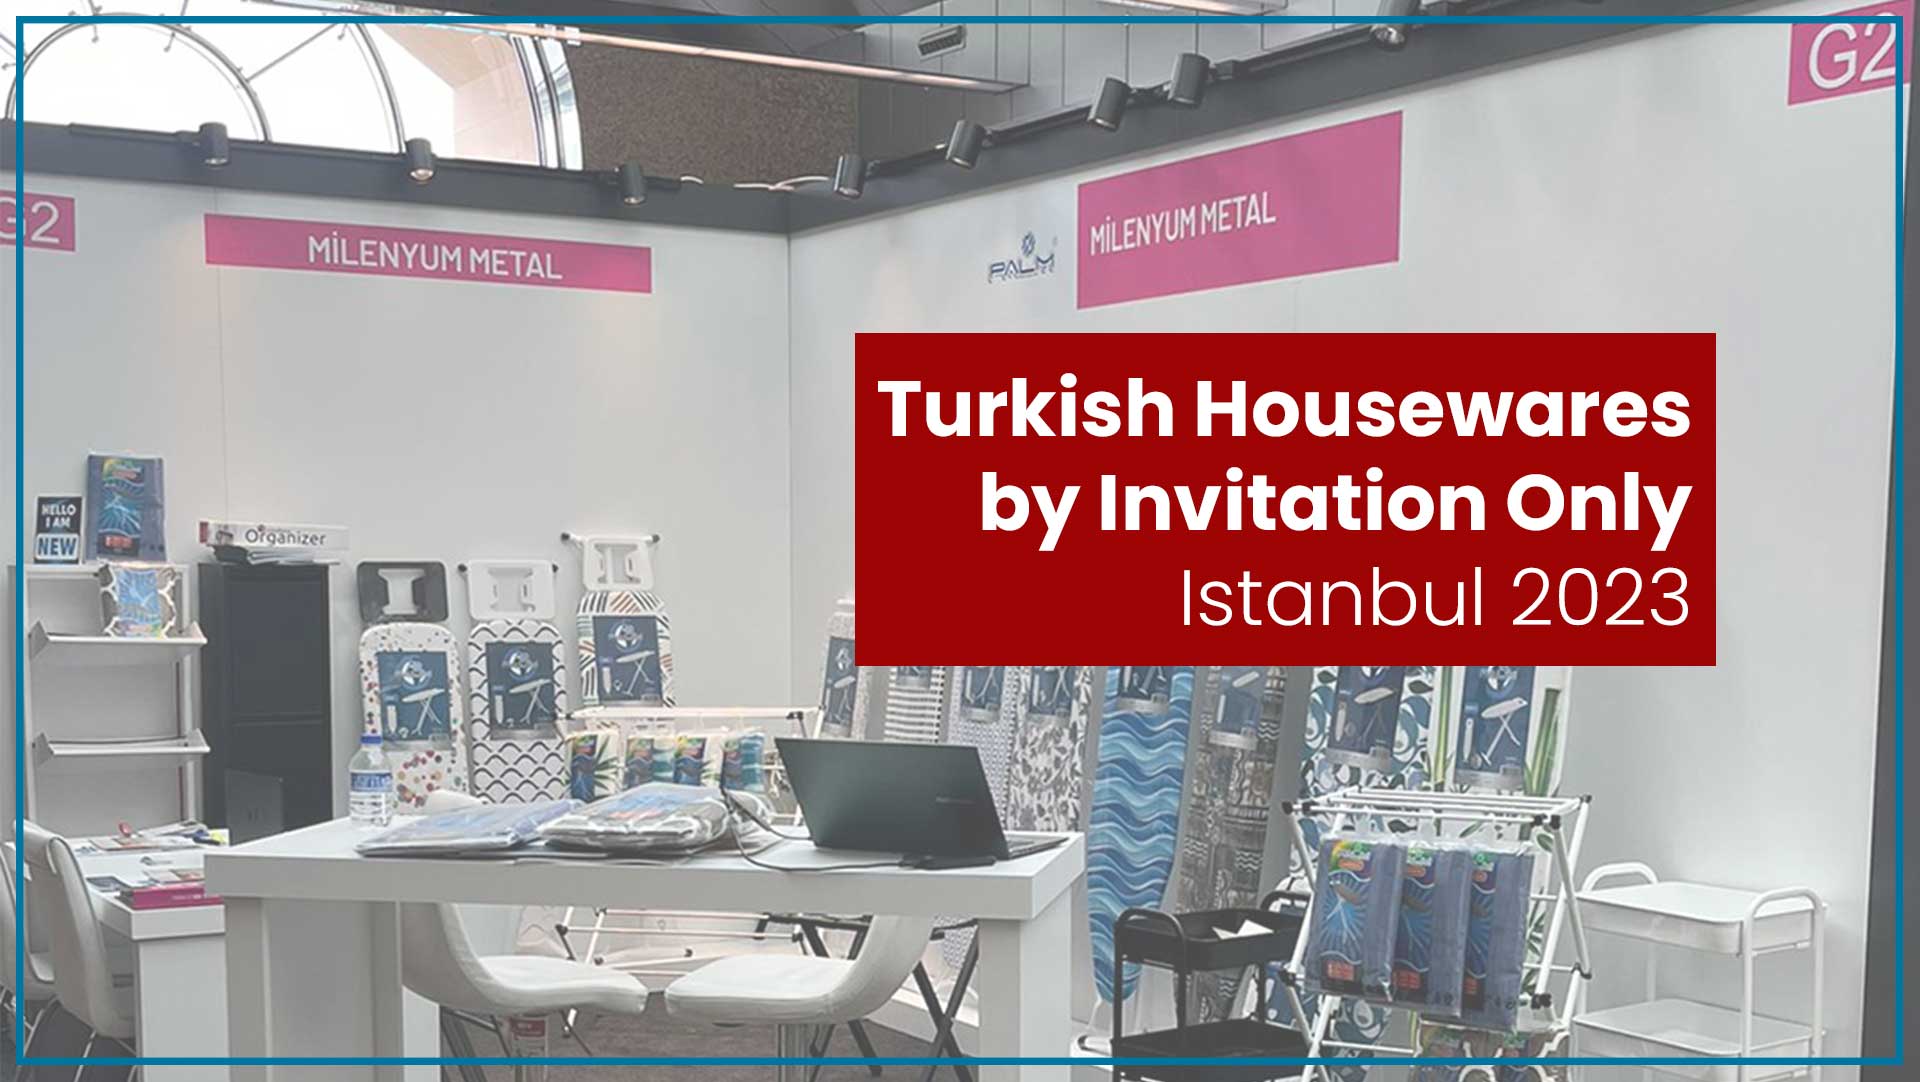 Turkish Houseware by Invitation Only